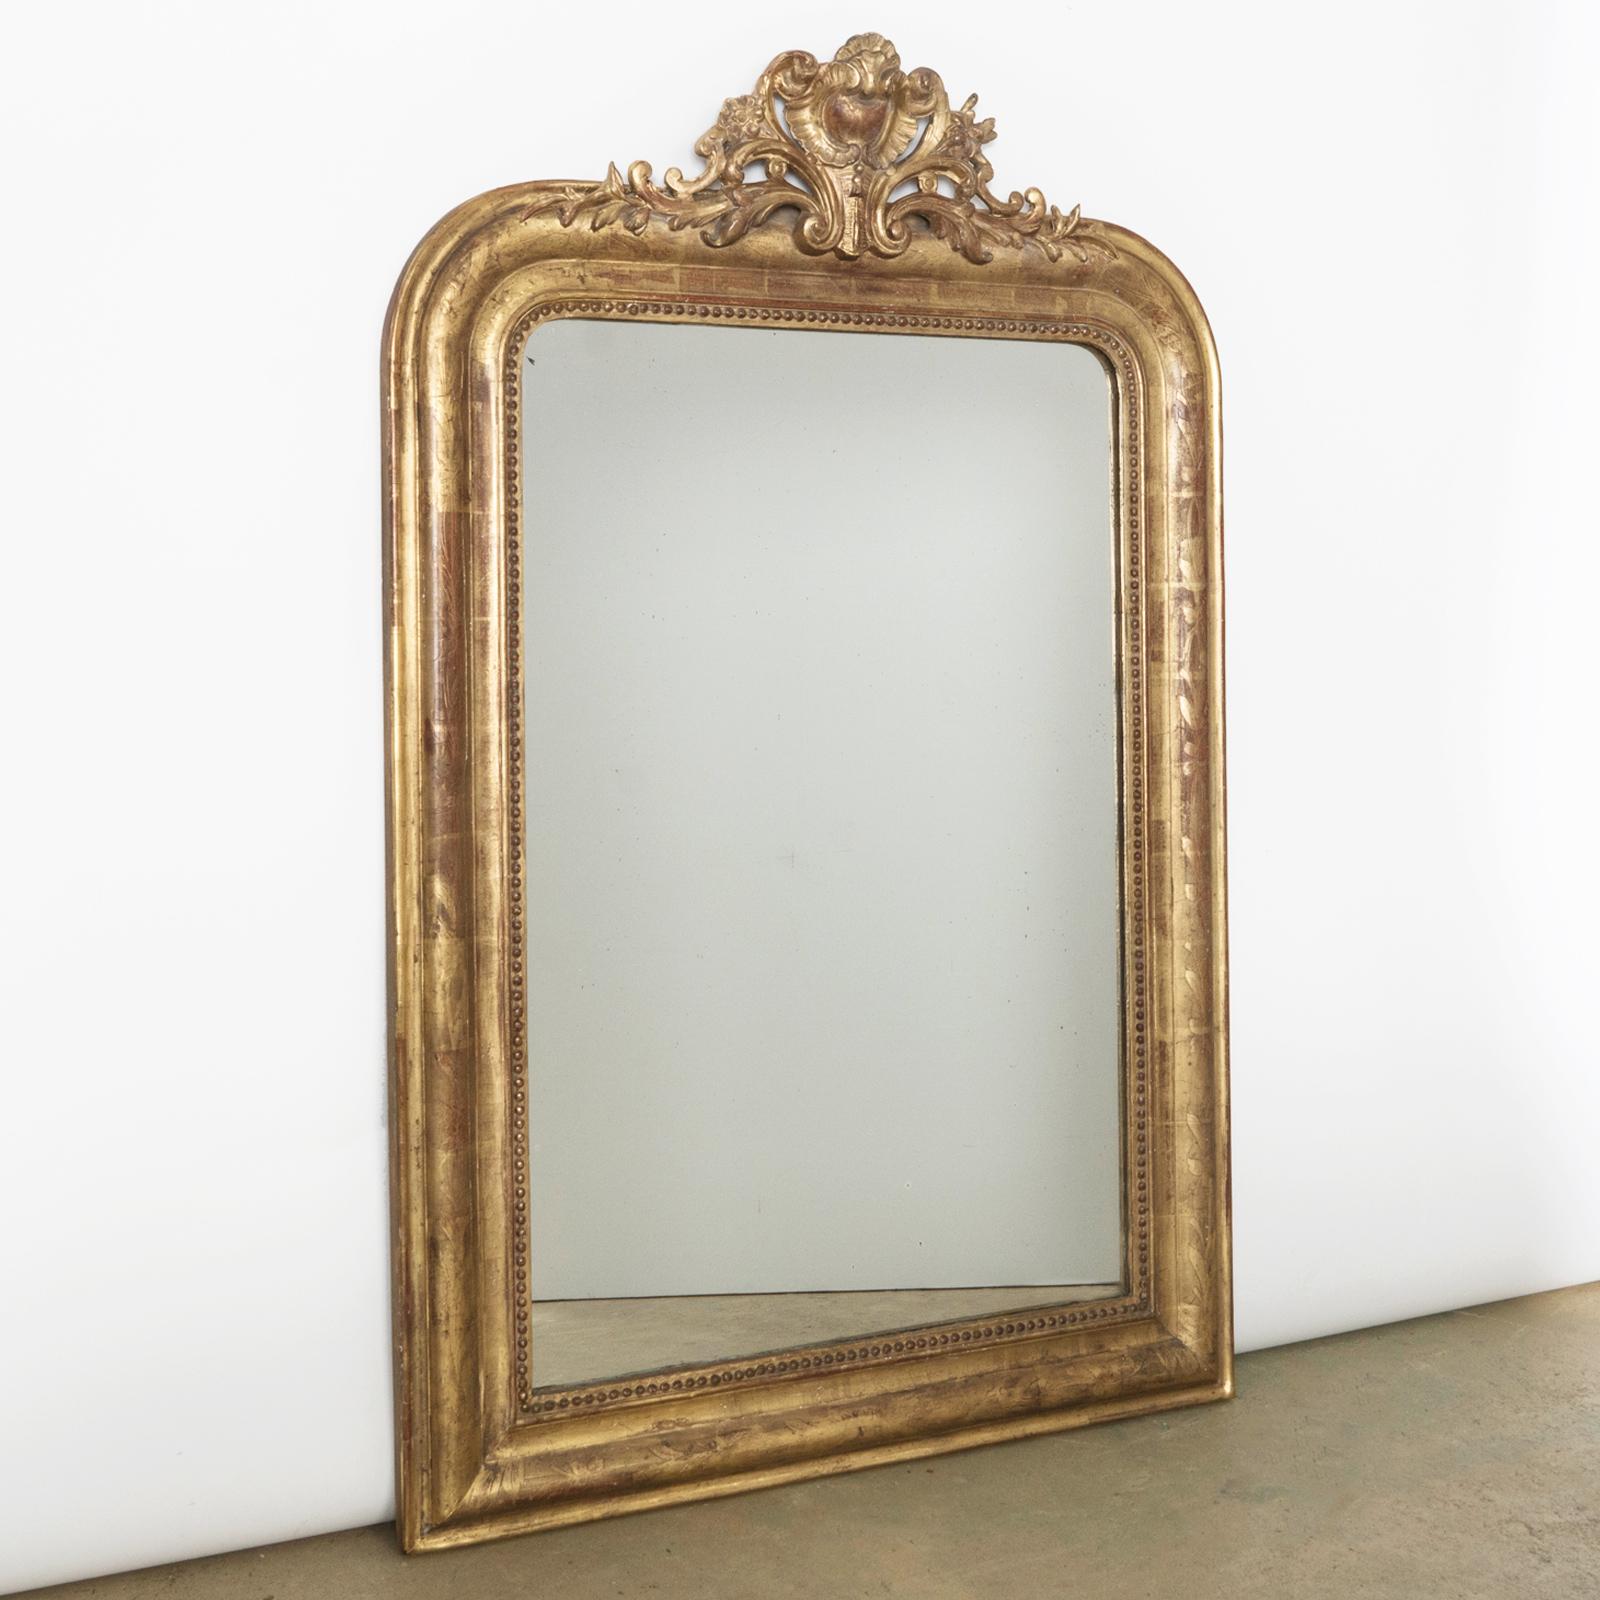 Antique French 19th Century Louis Philippe style gold gilt mirror with elegant small crest.

This beautiful antique French gold gilt mirror has the typical rounded upper corners that make it a Louis Philippe mirror.

The mirror has its original